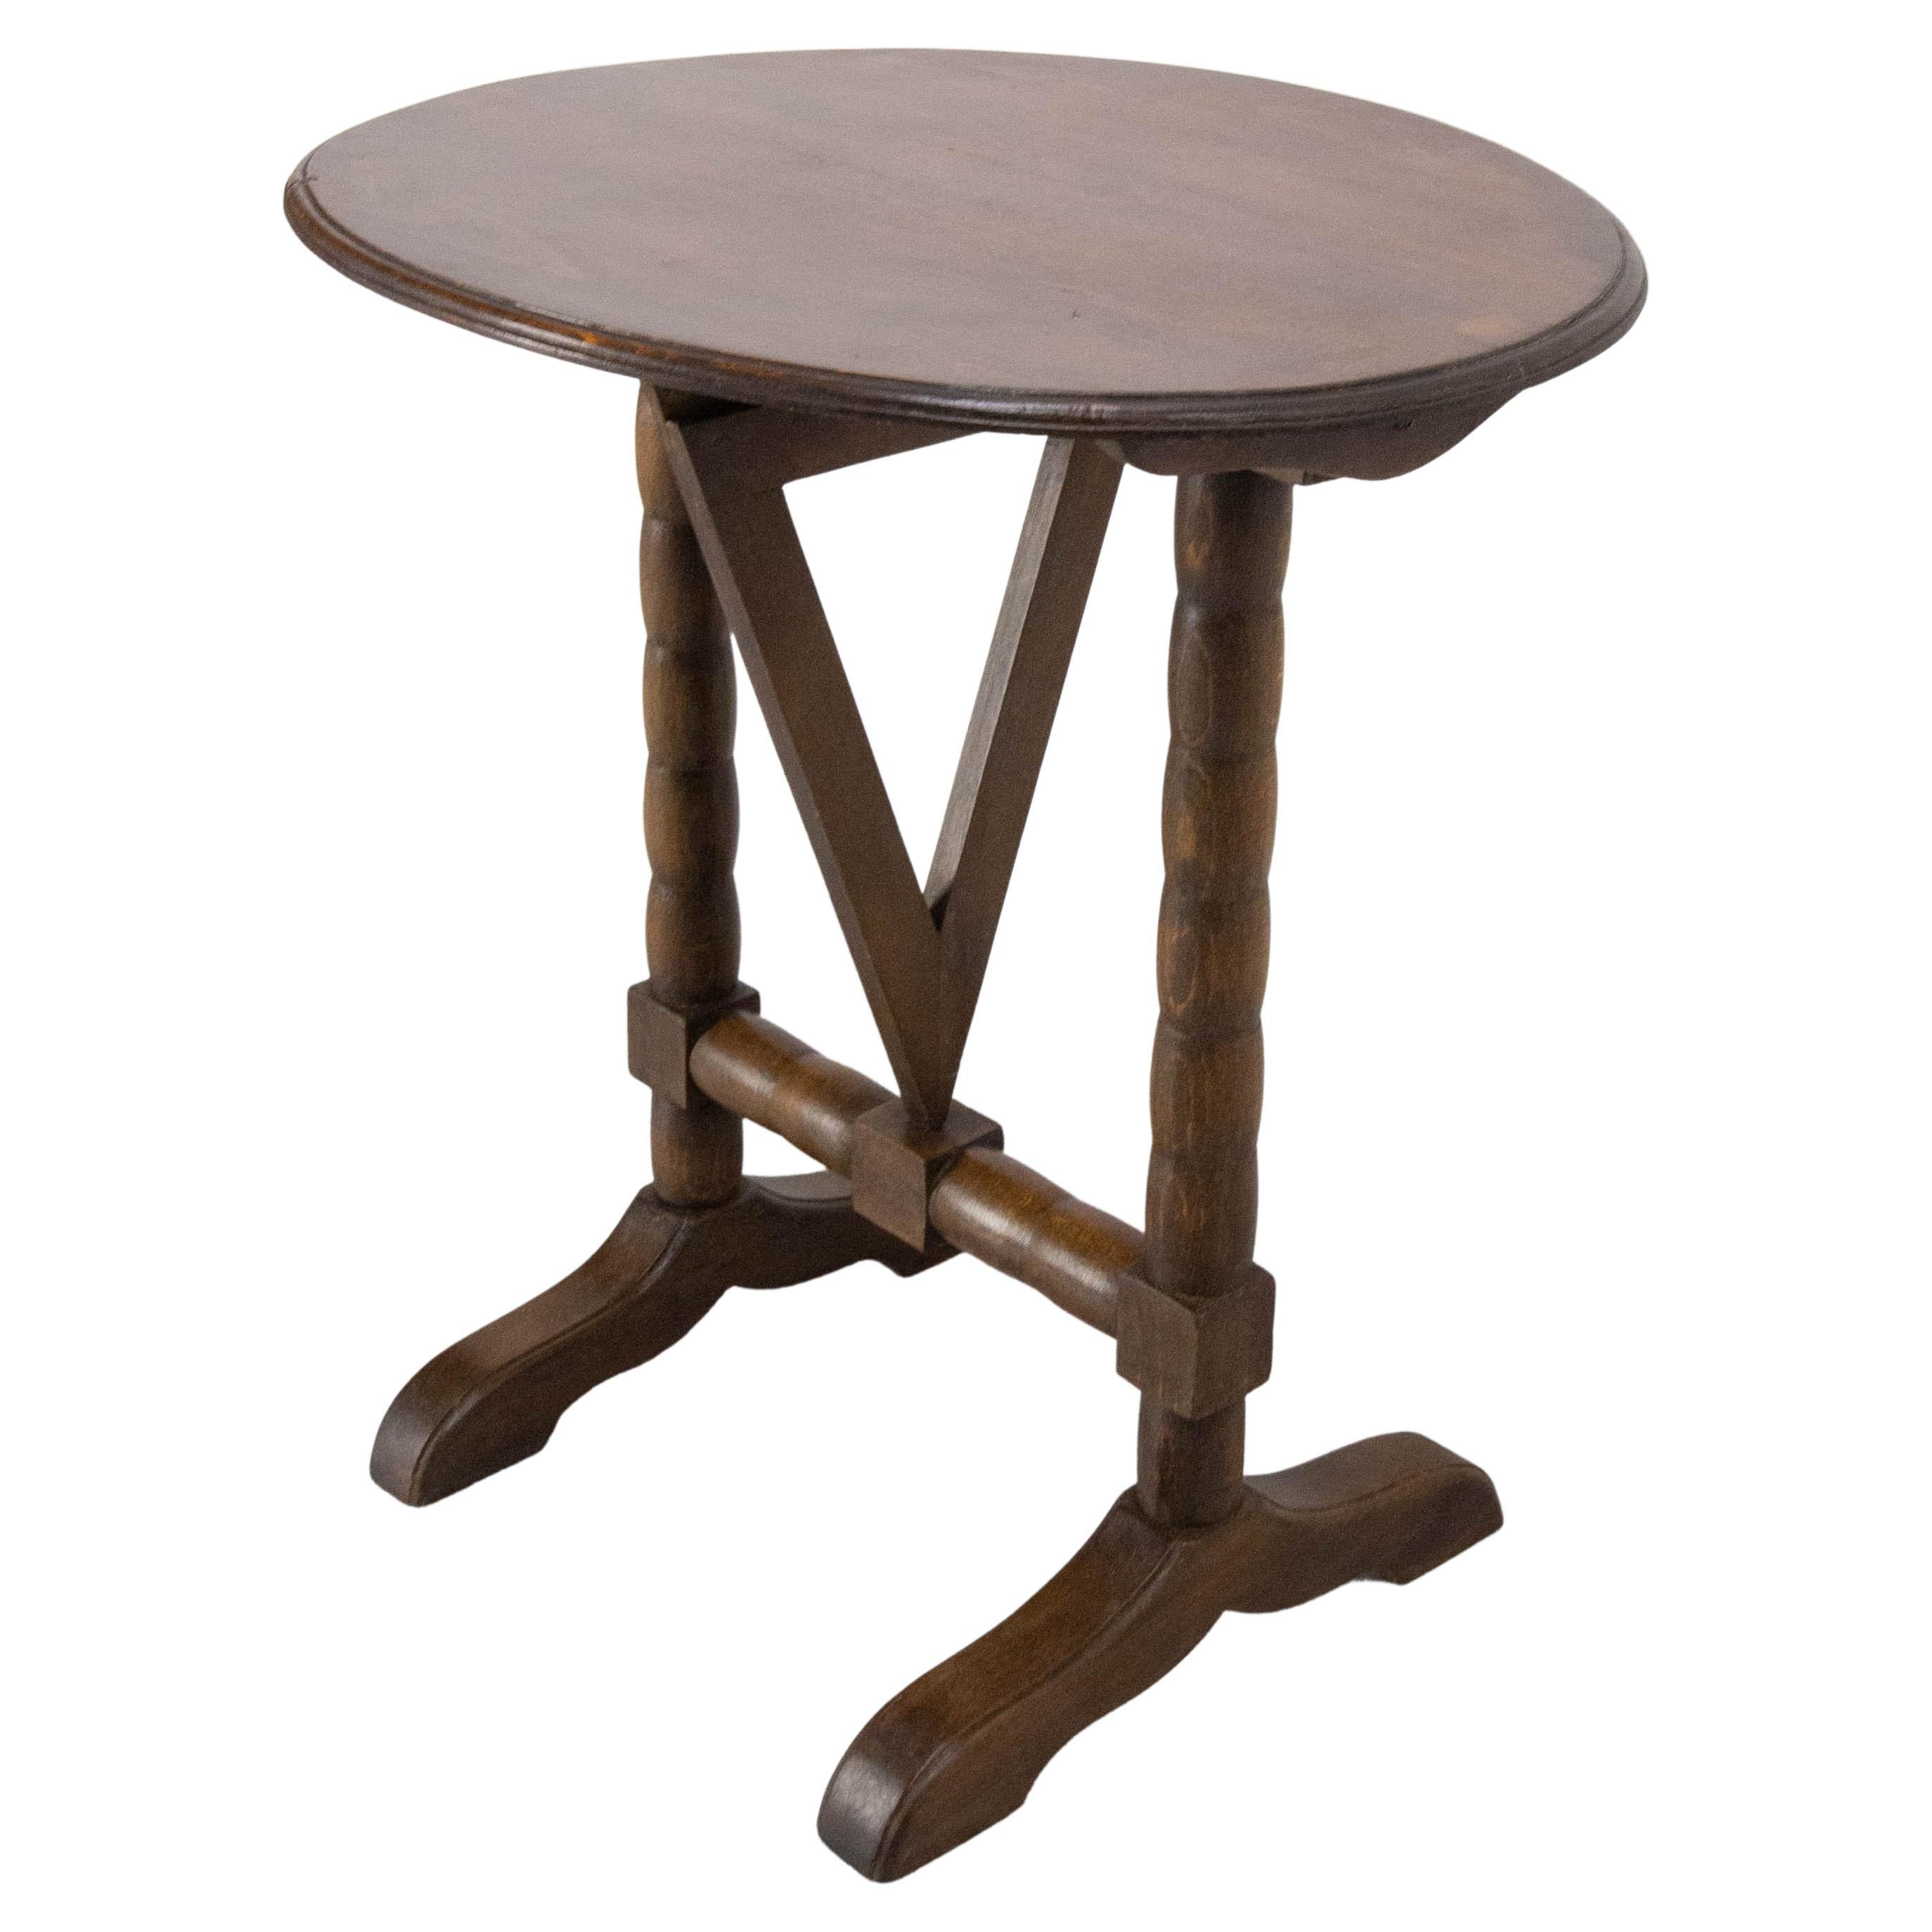 French Little Gueridon Foldable Side Table Called Winemaker's Table 19th Century